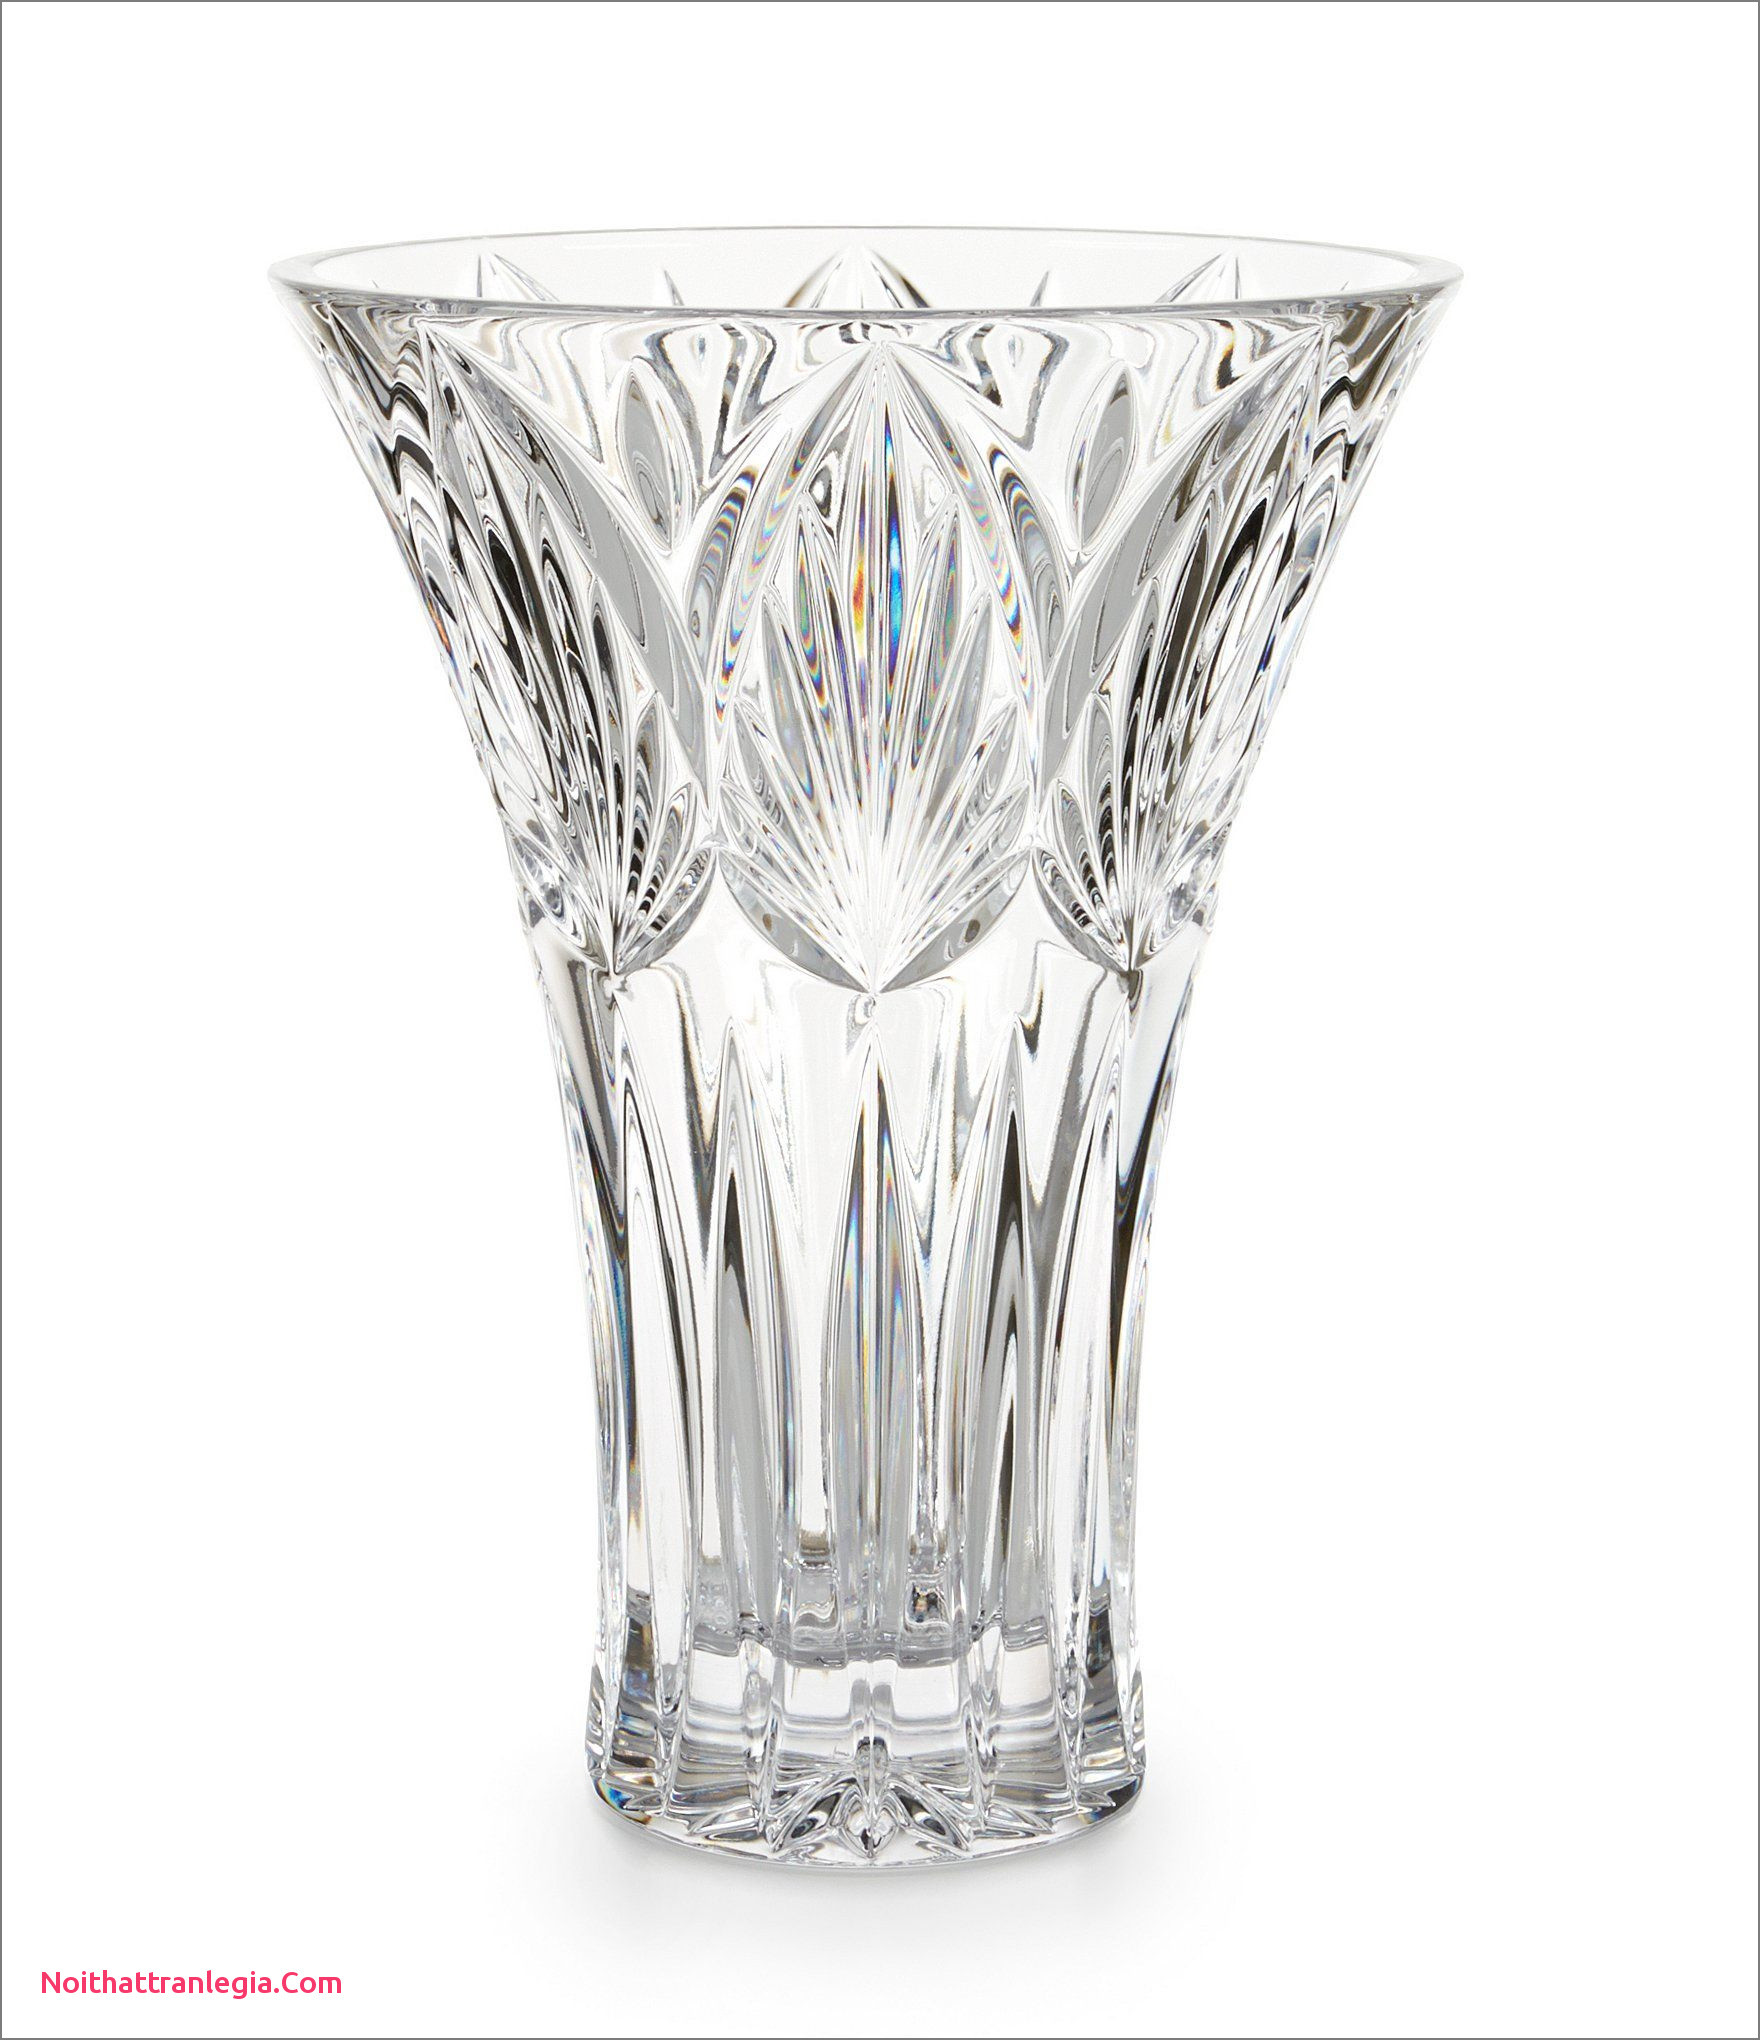 24 Amazing 20 Inch Clear Glass Vase 2024 free download 20 inch clear glass vase of 20 large waterford crystal vase noithattranlegia vases design throughout large waterford crystal vase best of waterford westbridge crystal vase of large waterford